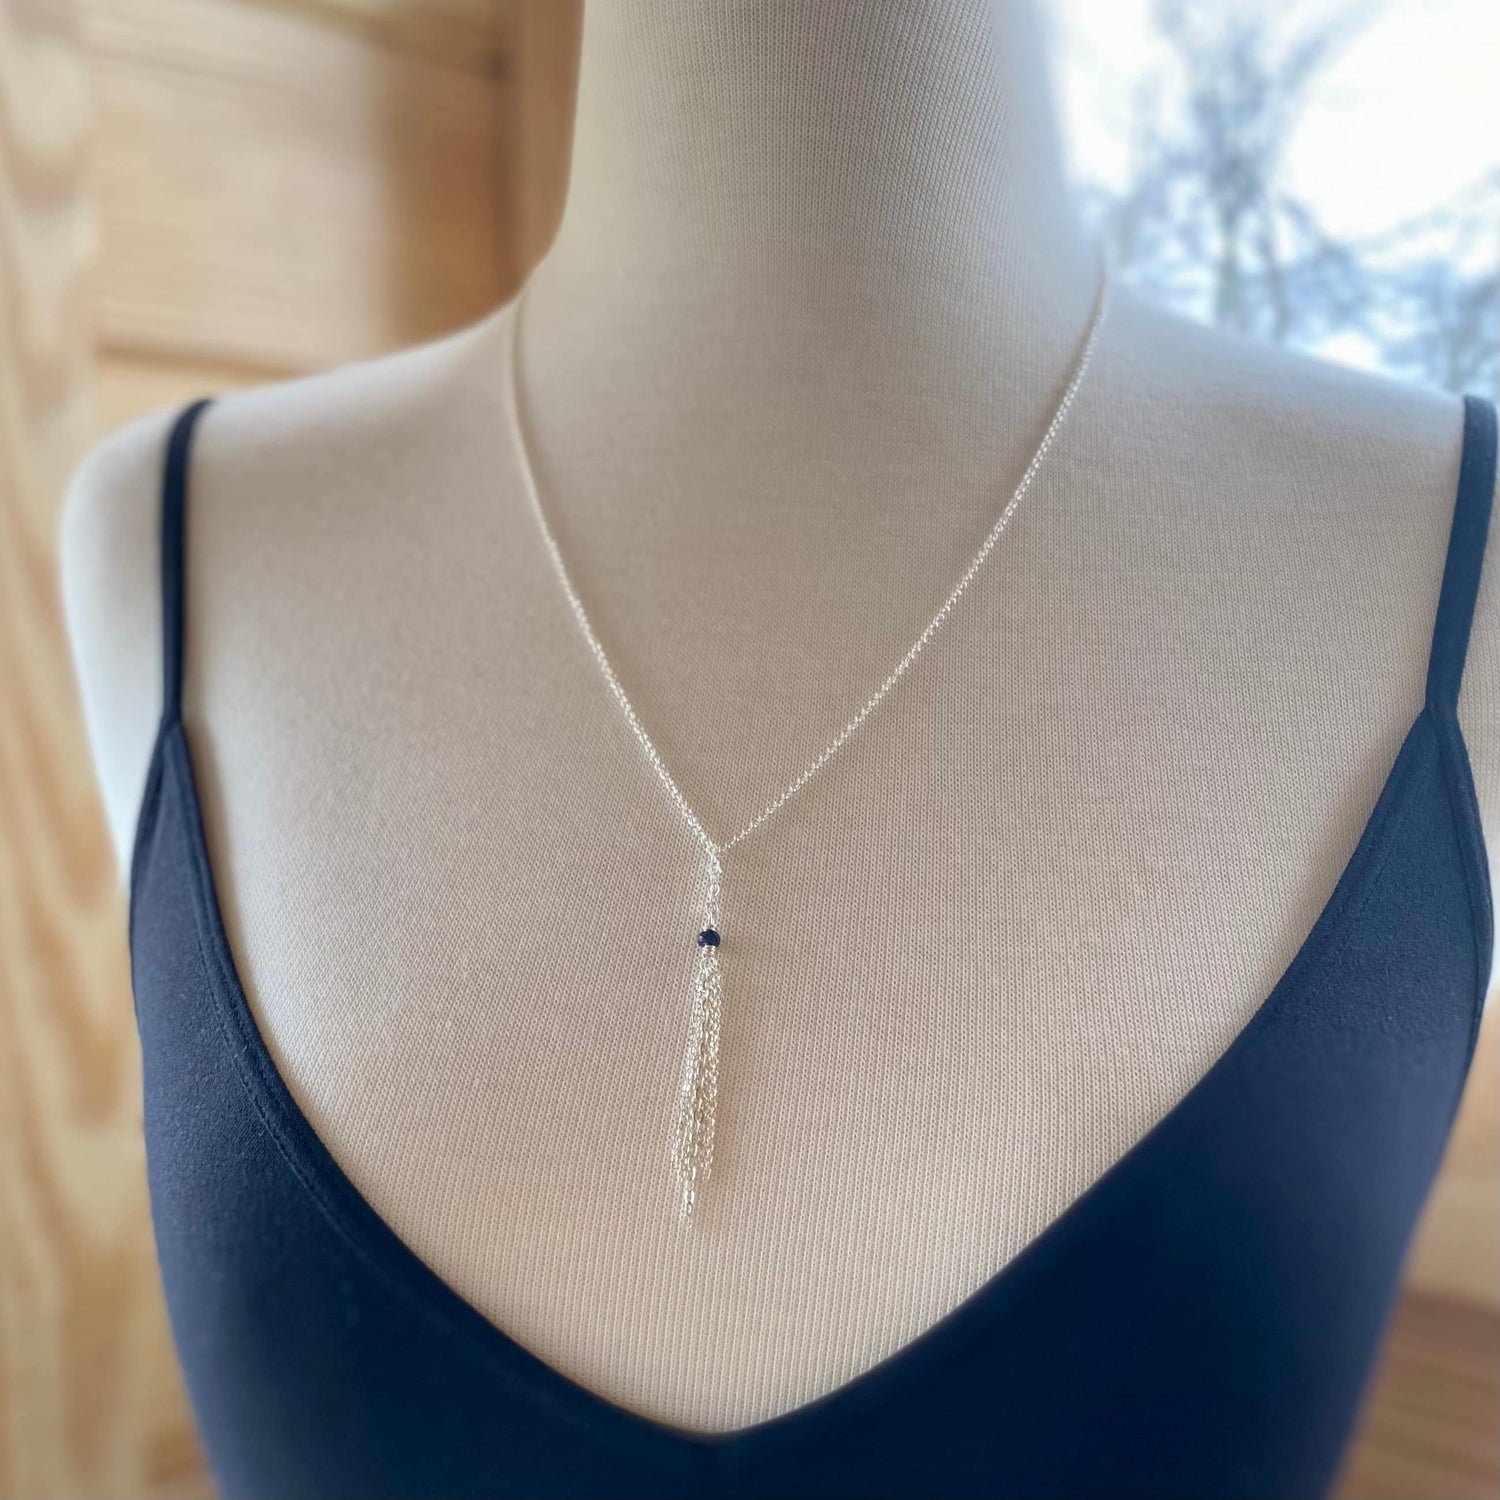 Sterling Silver Fringe Chain Necklace with Birthstone, Elegant Mixed Chain Gemstone Pendant, Handcrafted Birthday Gift Sister Friend Mother